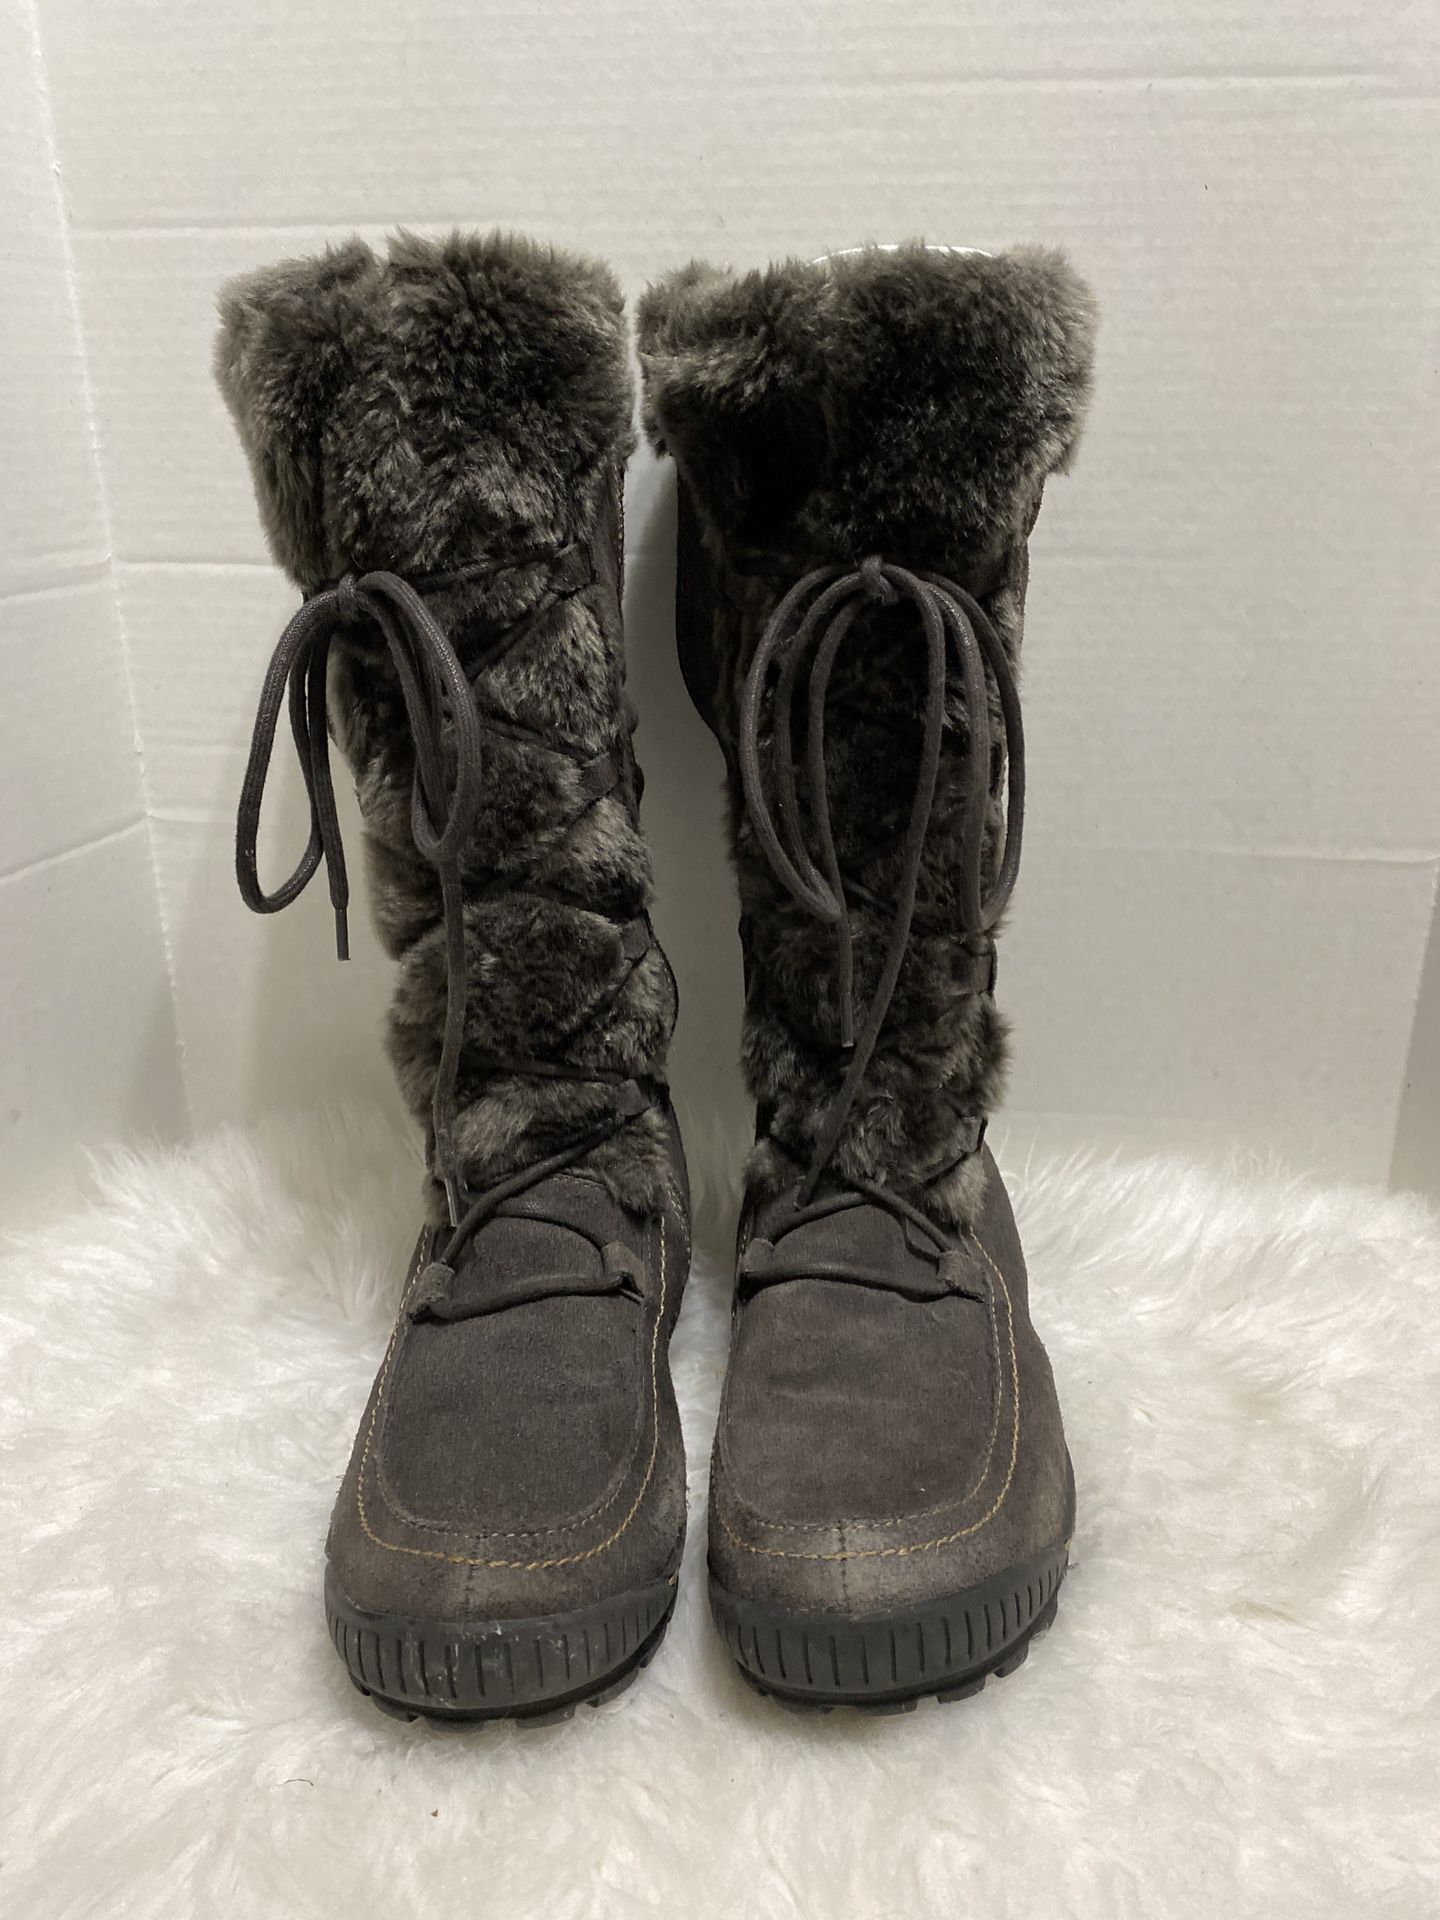 Baretraps Dory Winter Boots Gray Suede Leather Faux Fur Lined Tall Size 9